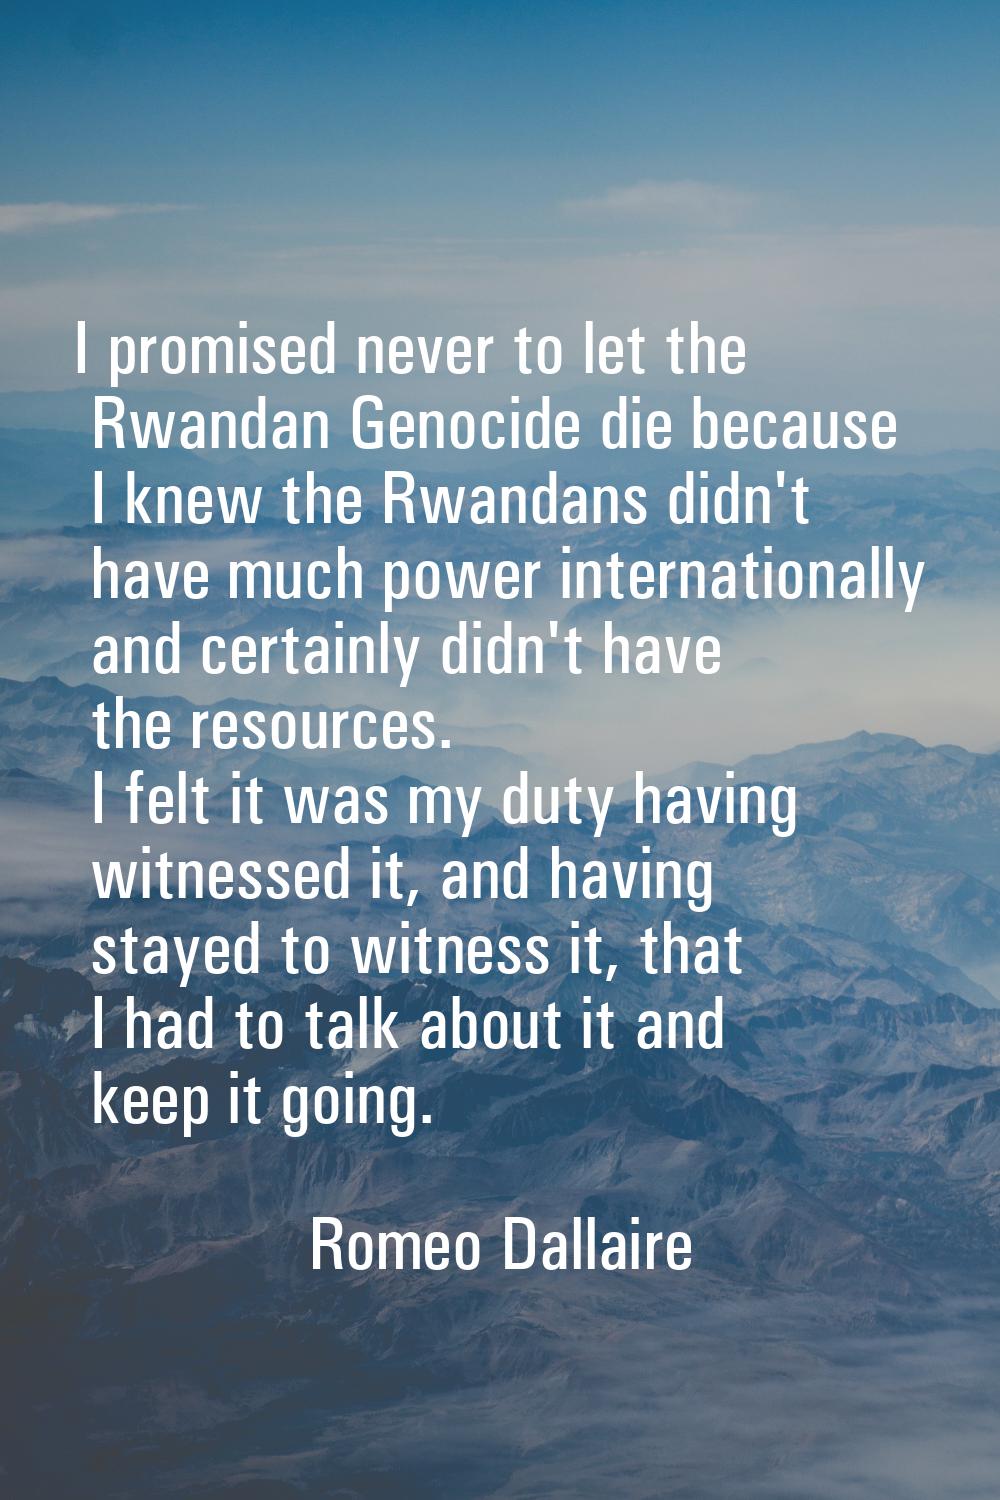 I promised never to let the Rwandan Genocide die because I knew the Rwandans didn't have much power